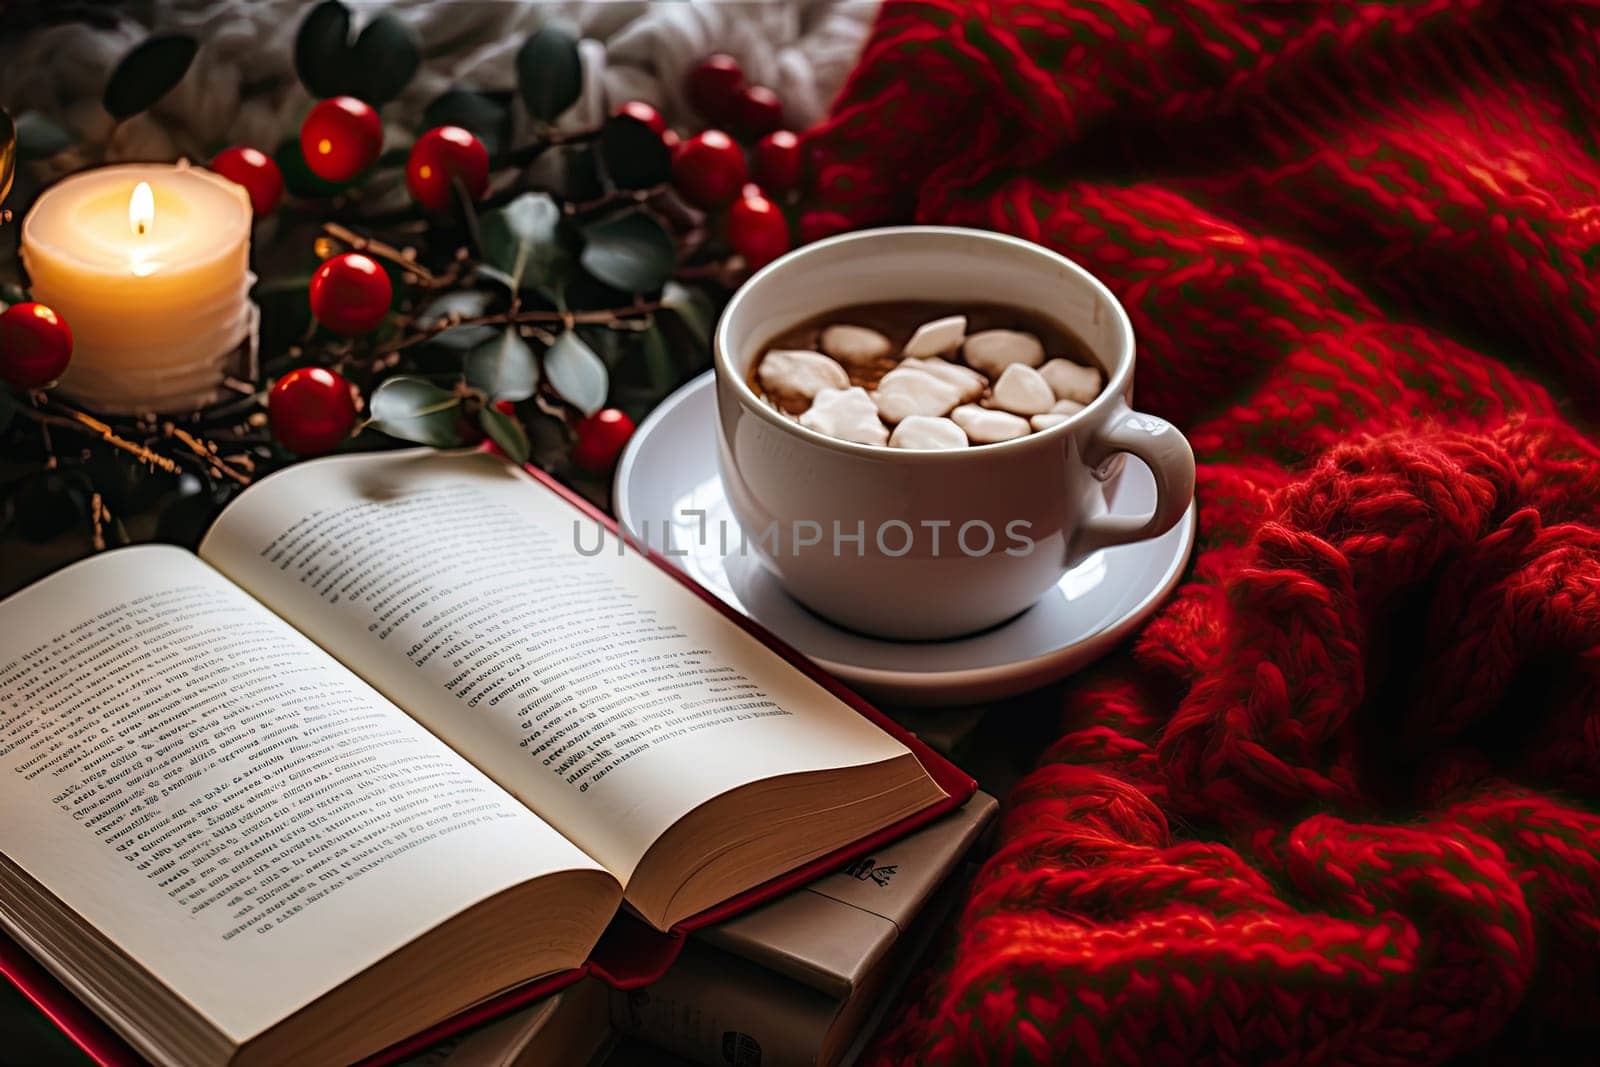 A Cozy Morning with Coffee and a Book